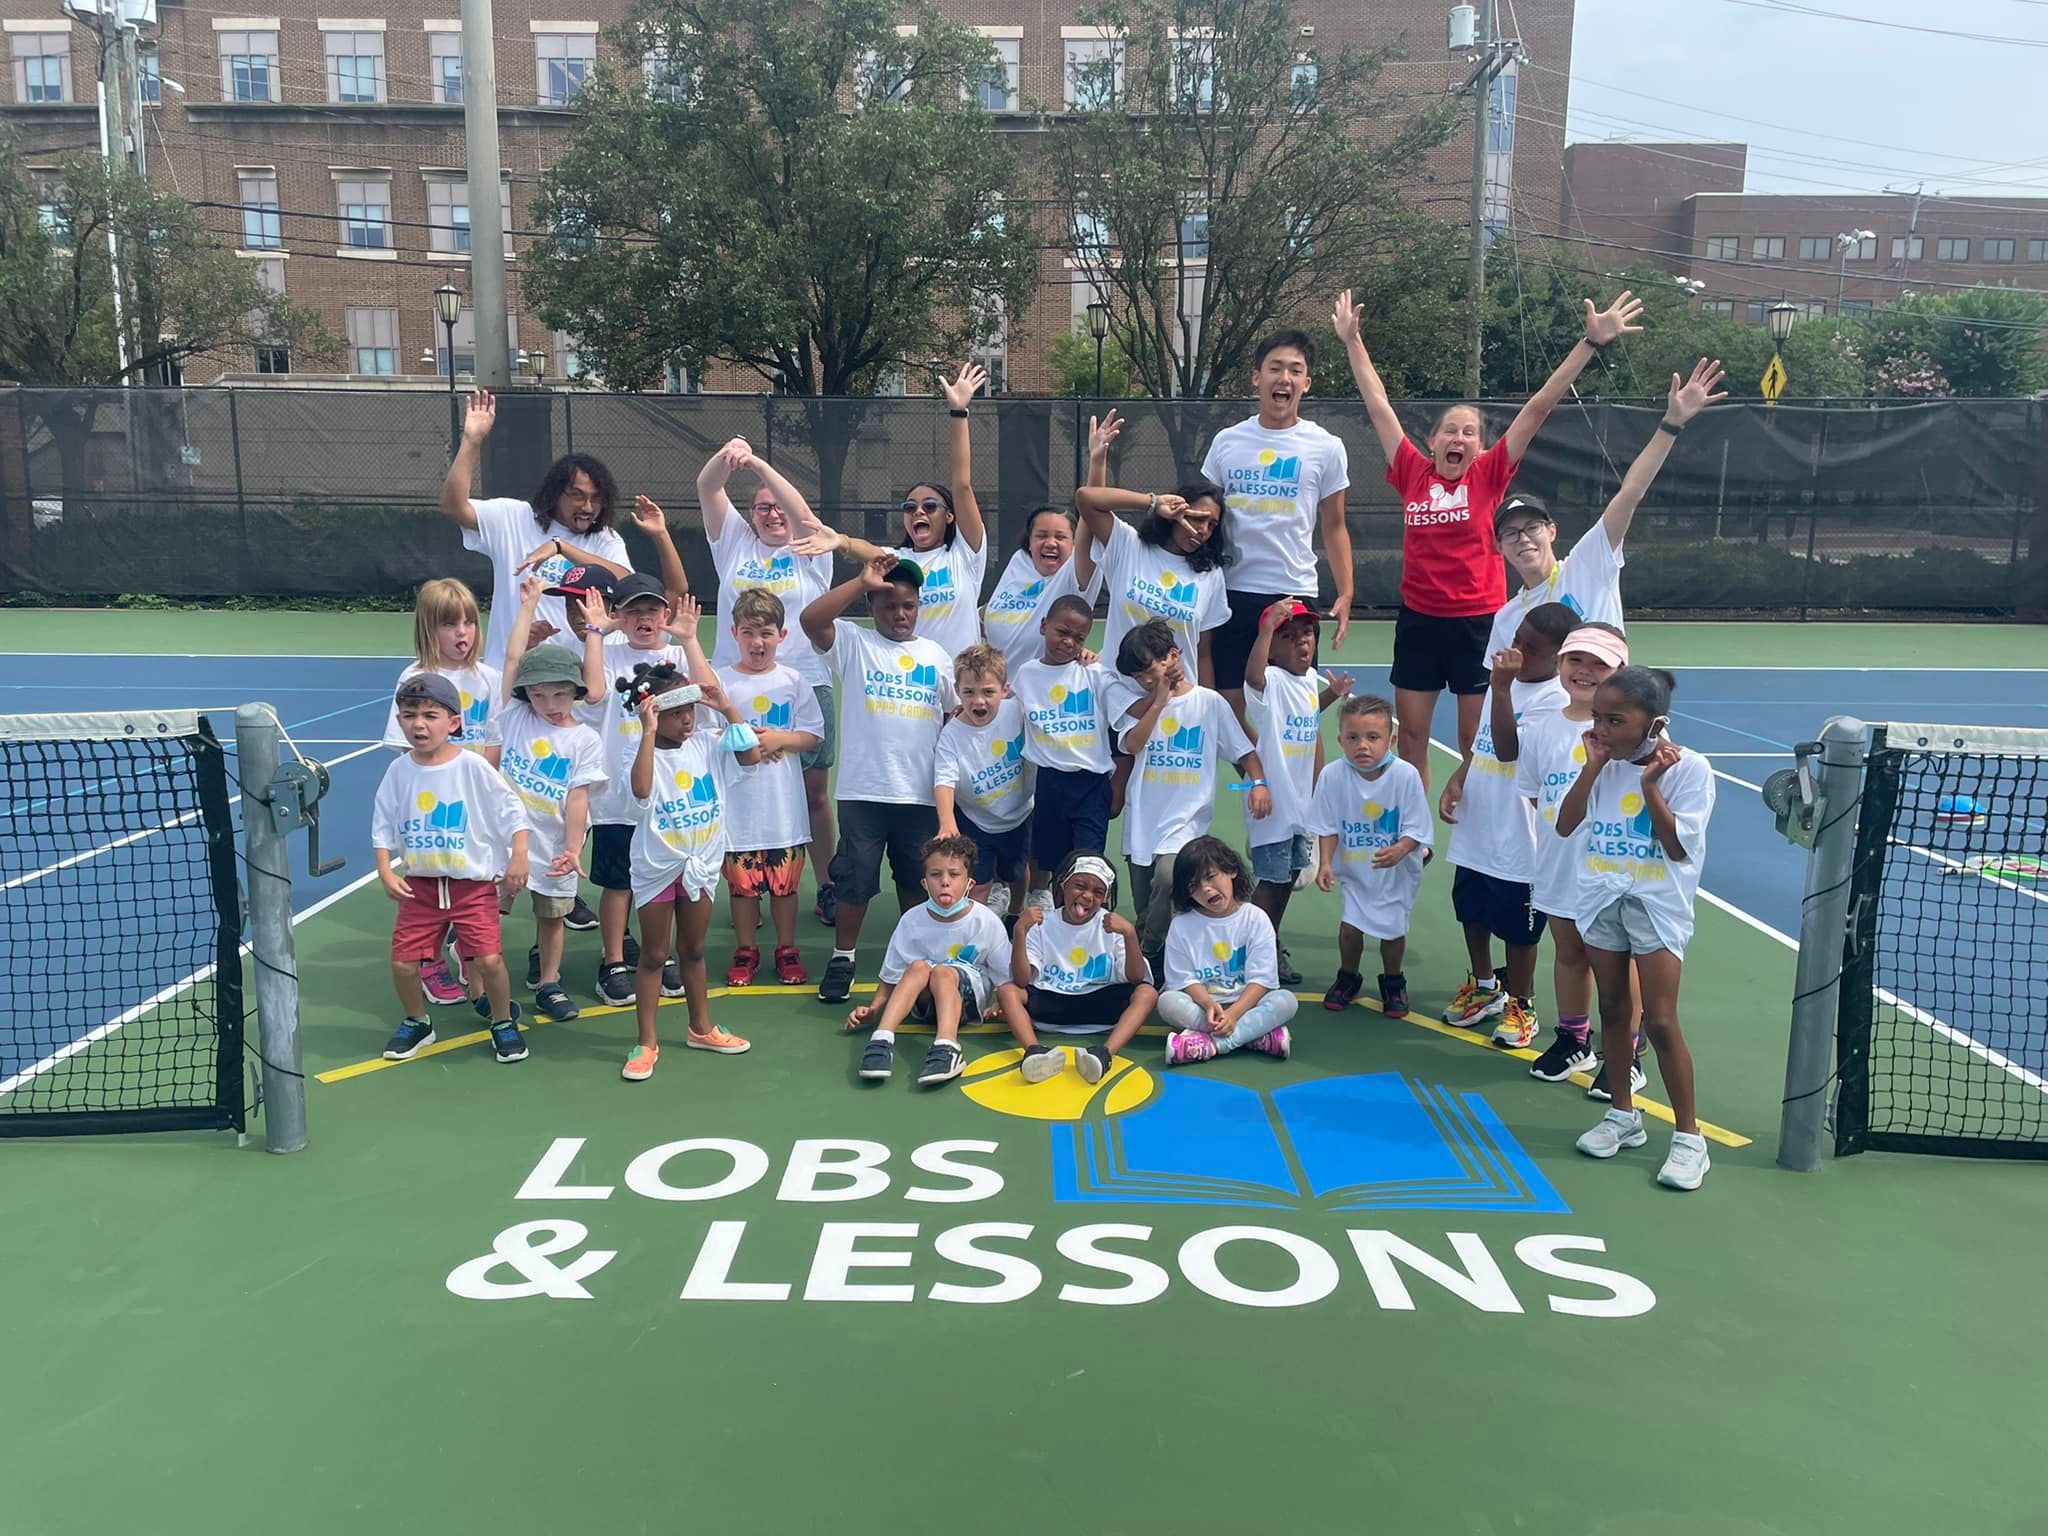 Lobs & Lessons staff on a tennis court with a large group of kids, all pulling silly faces and poses.